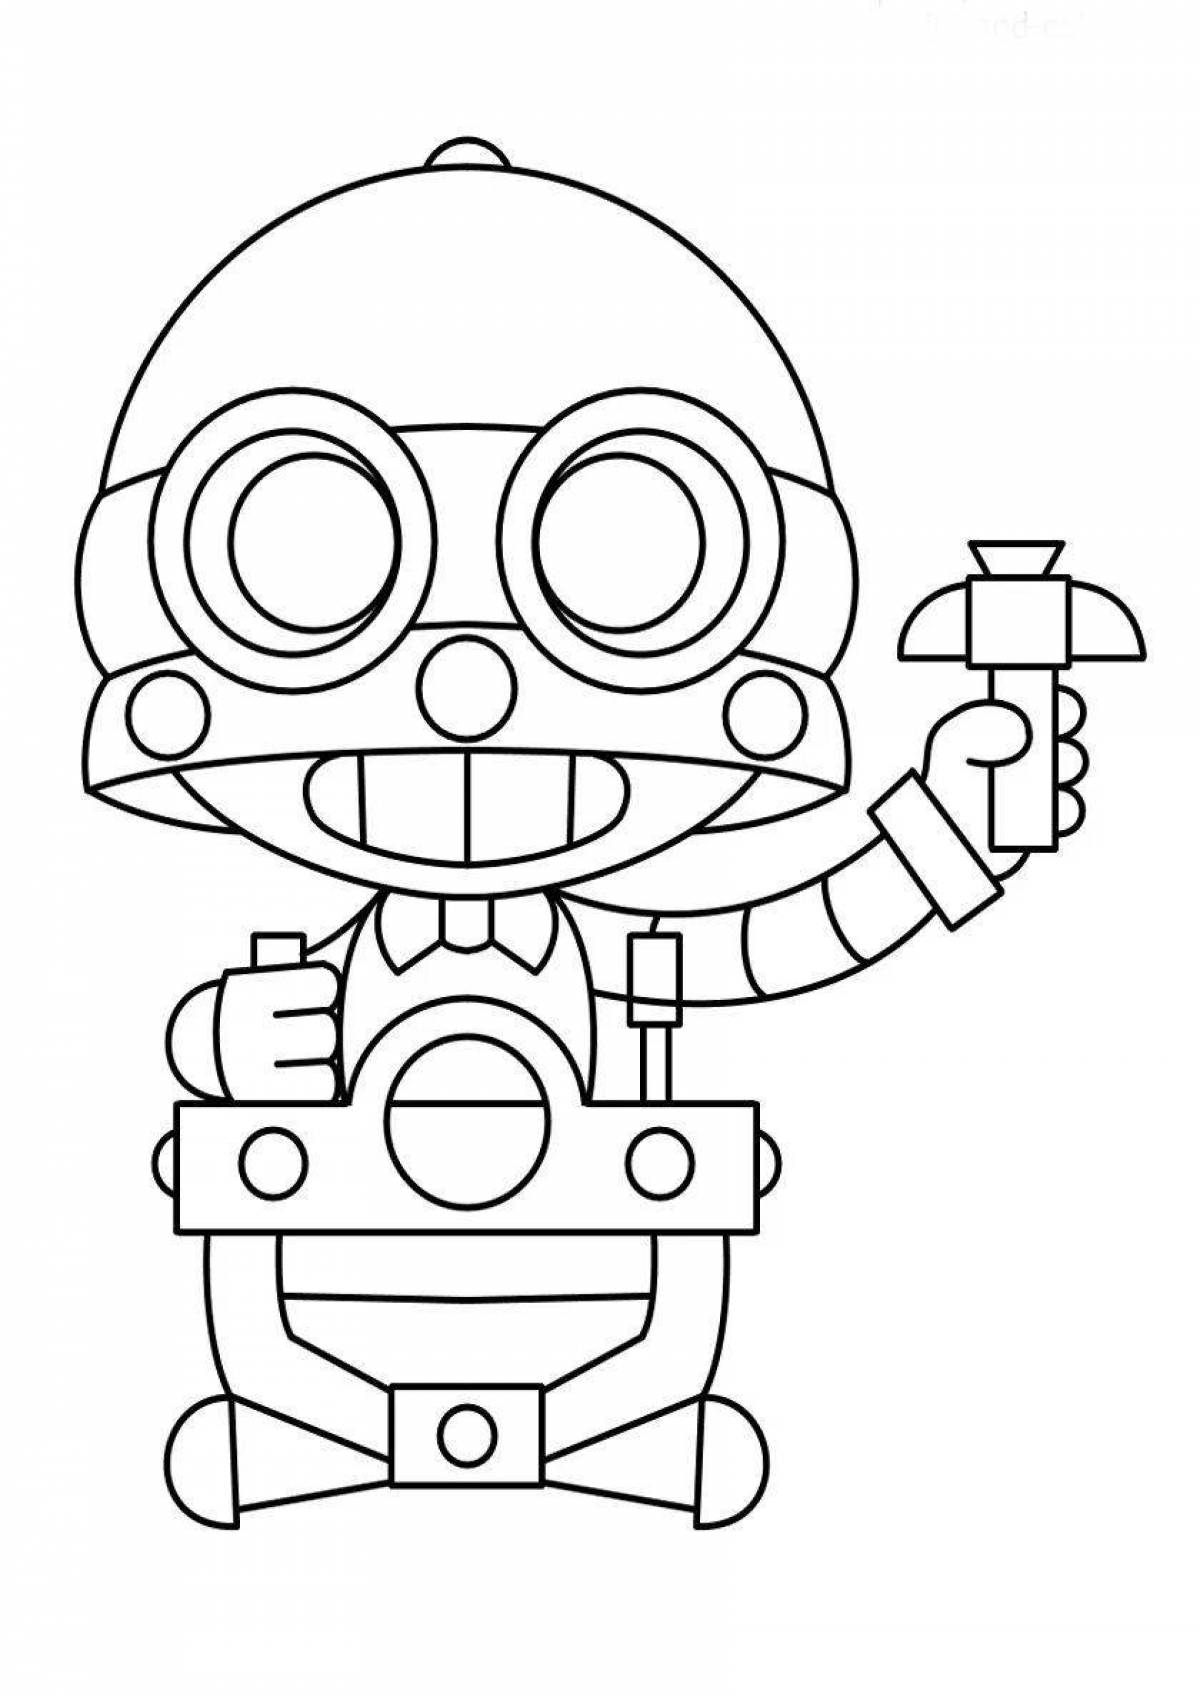 Bright brown stars coloring pages for kids